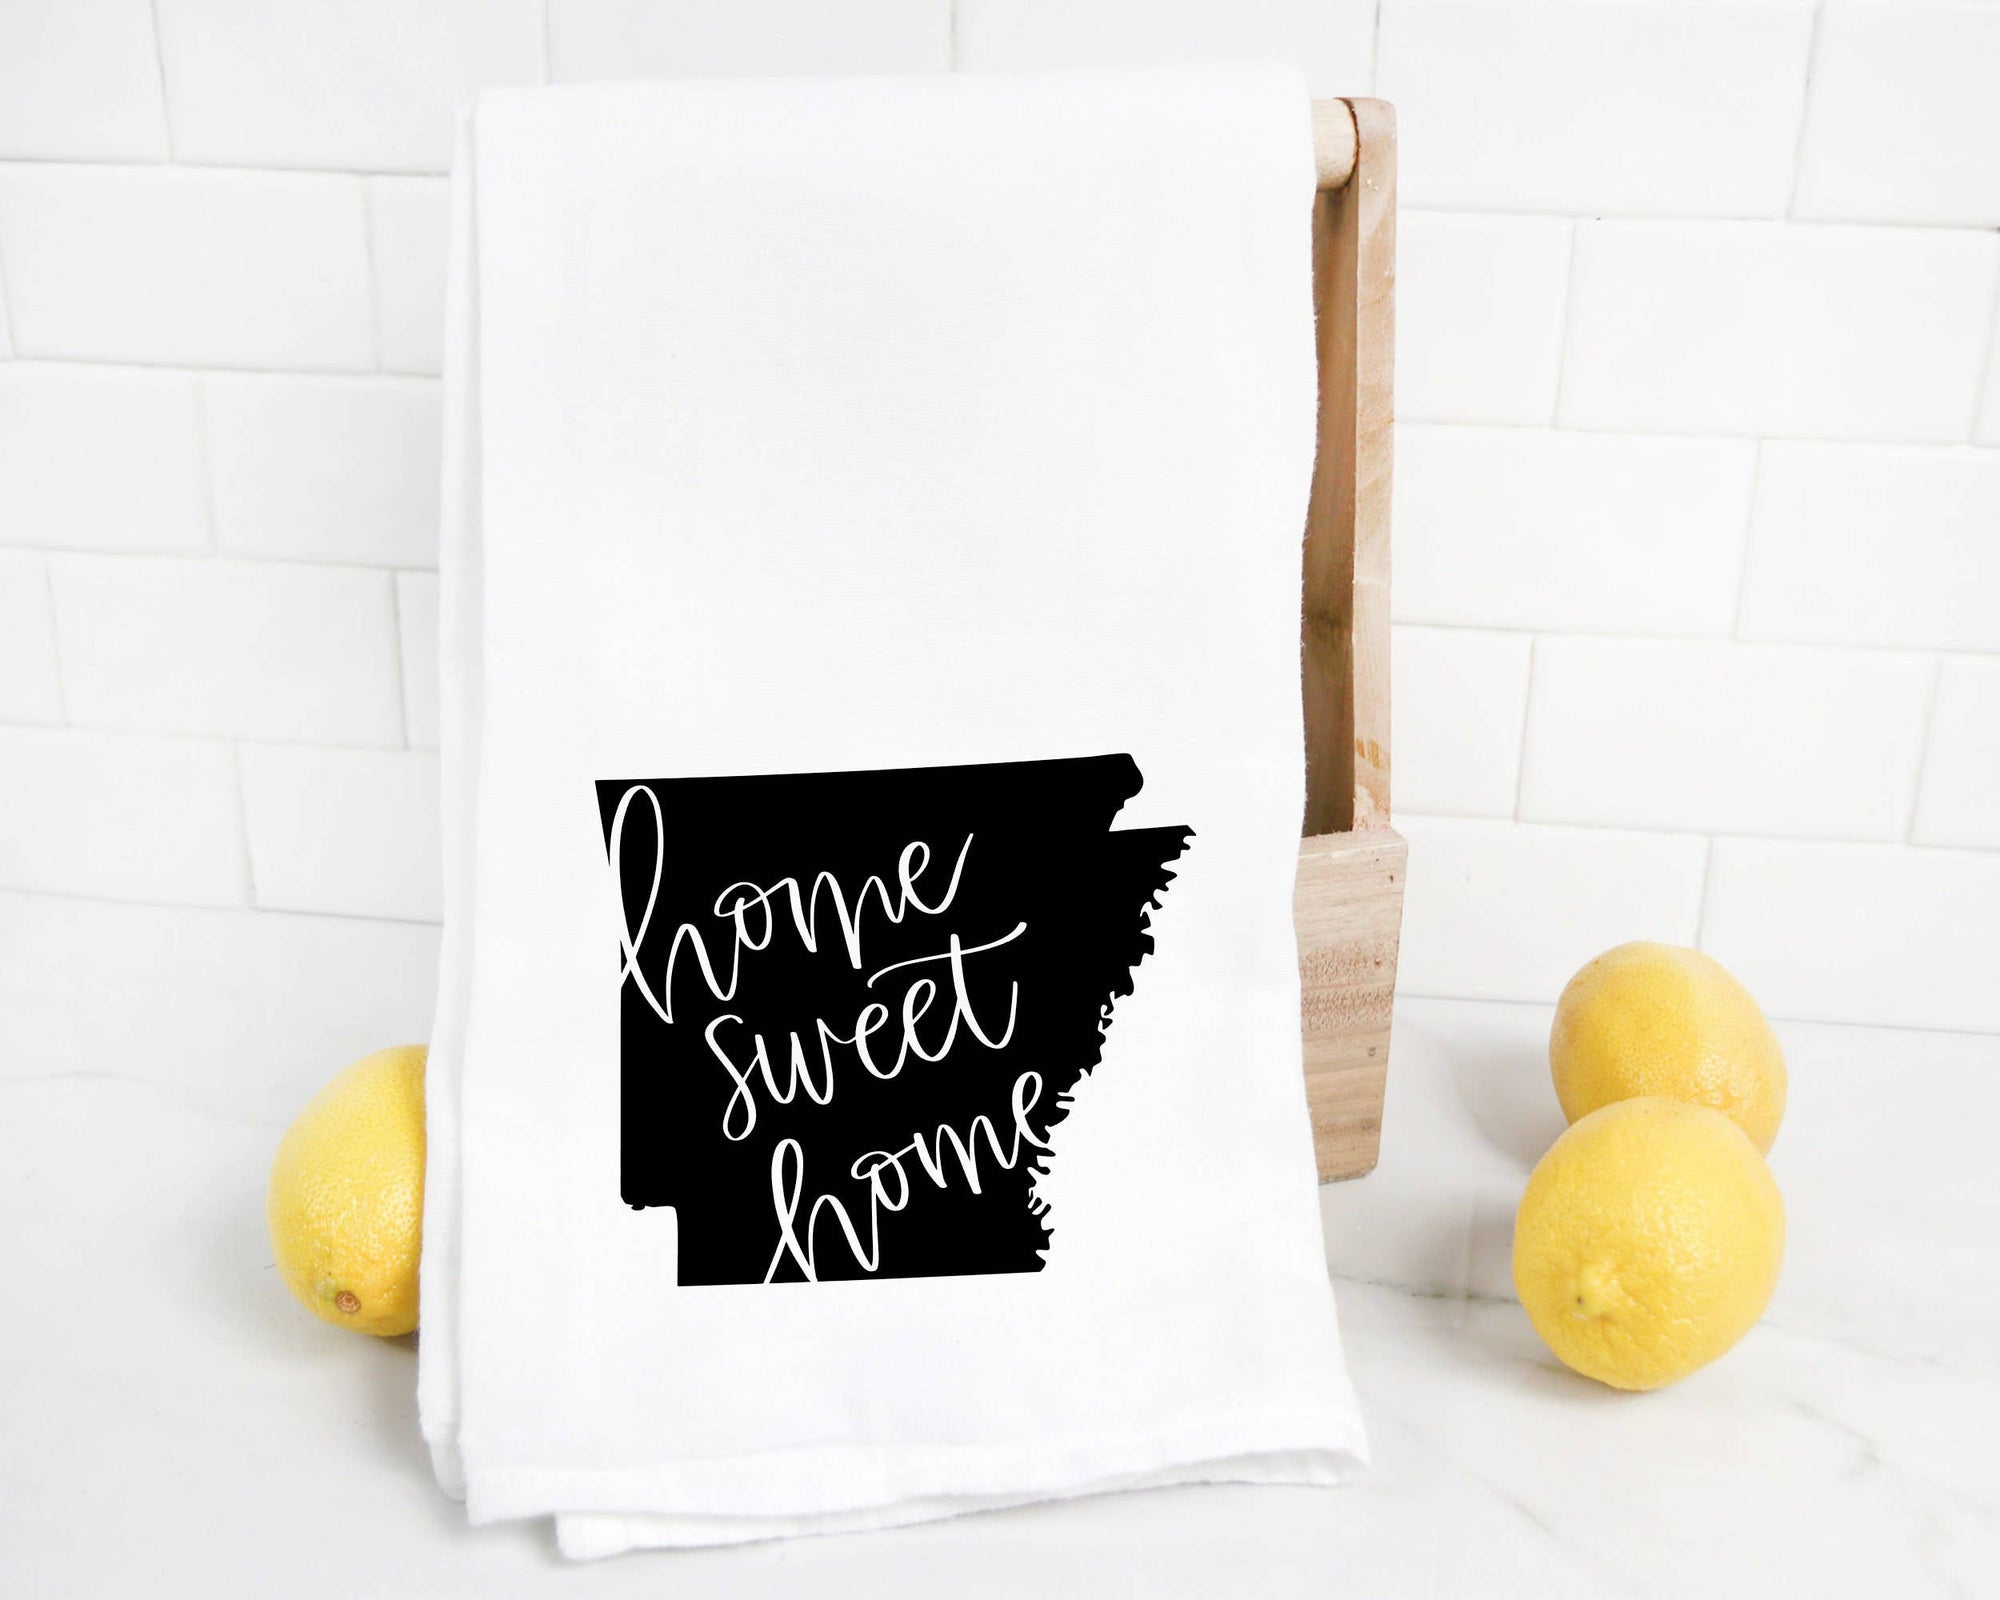 This Arkansas tea towel is the perfect gift for anyone who wants to bring a touch of home sweet home into their kitchen.